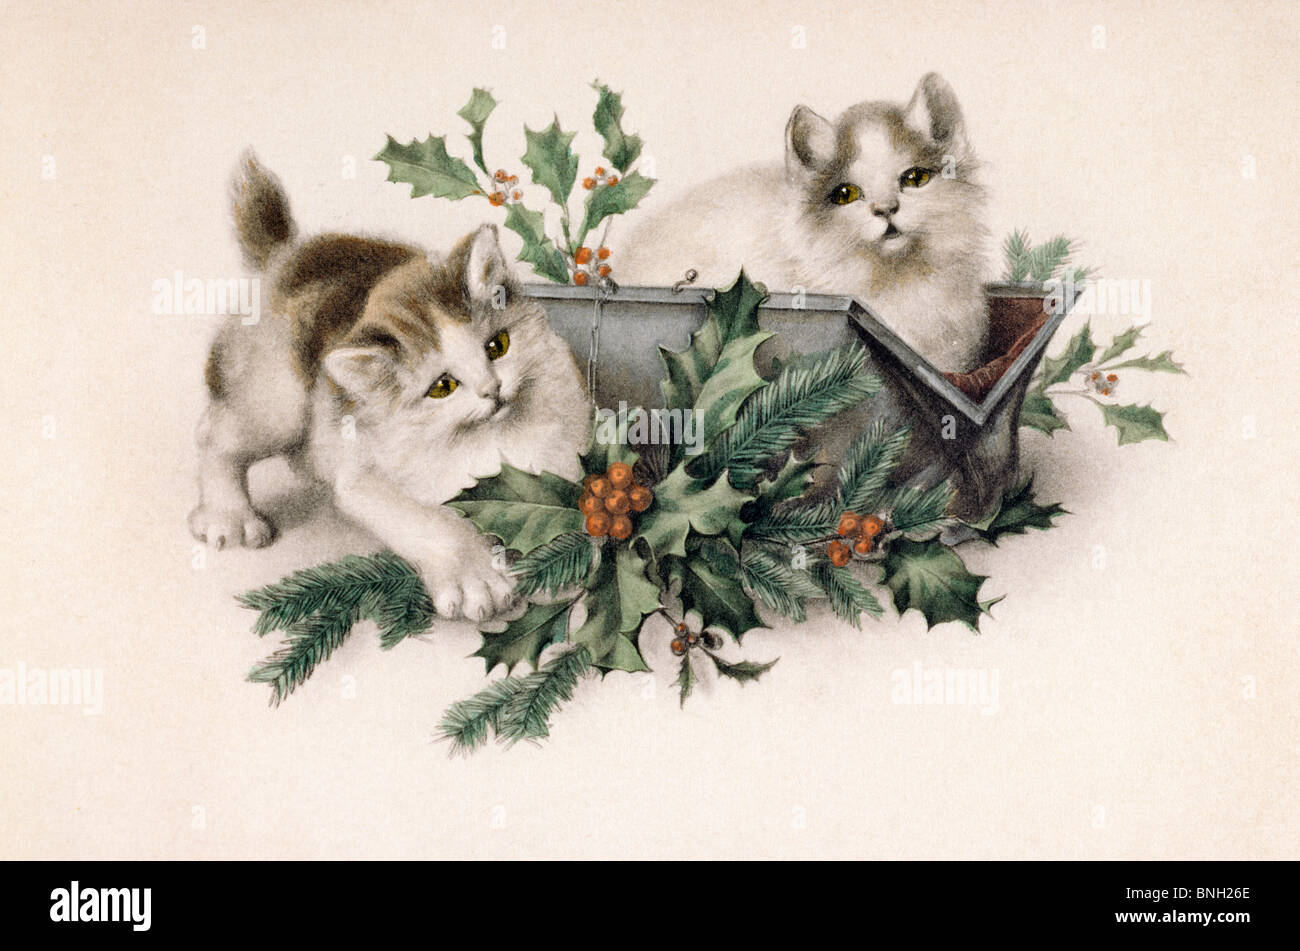 Kittens with Holly, Nostalgia Cards Stock Photo